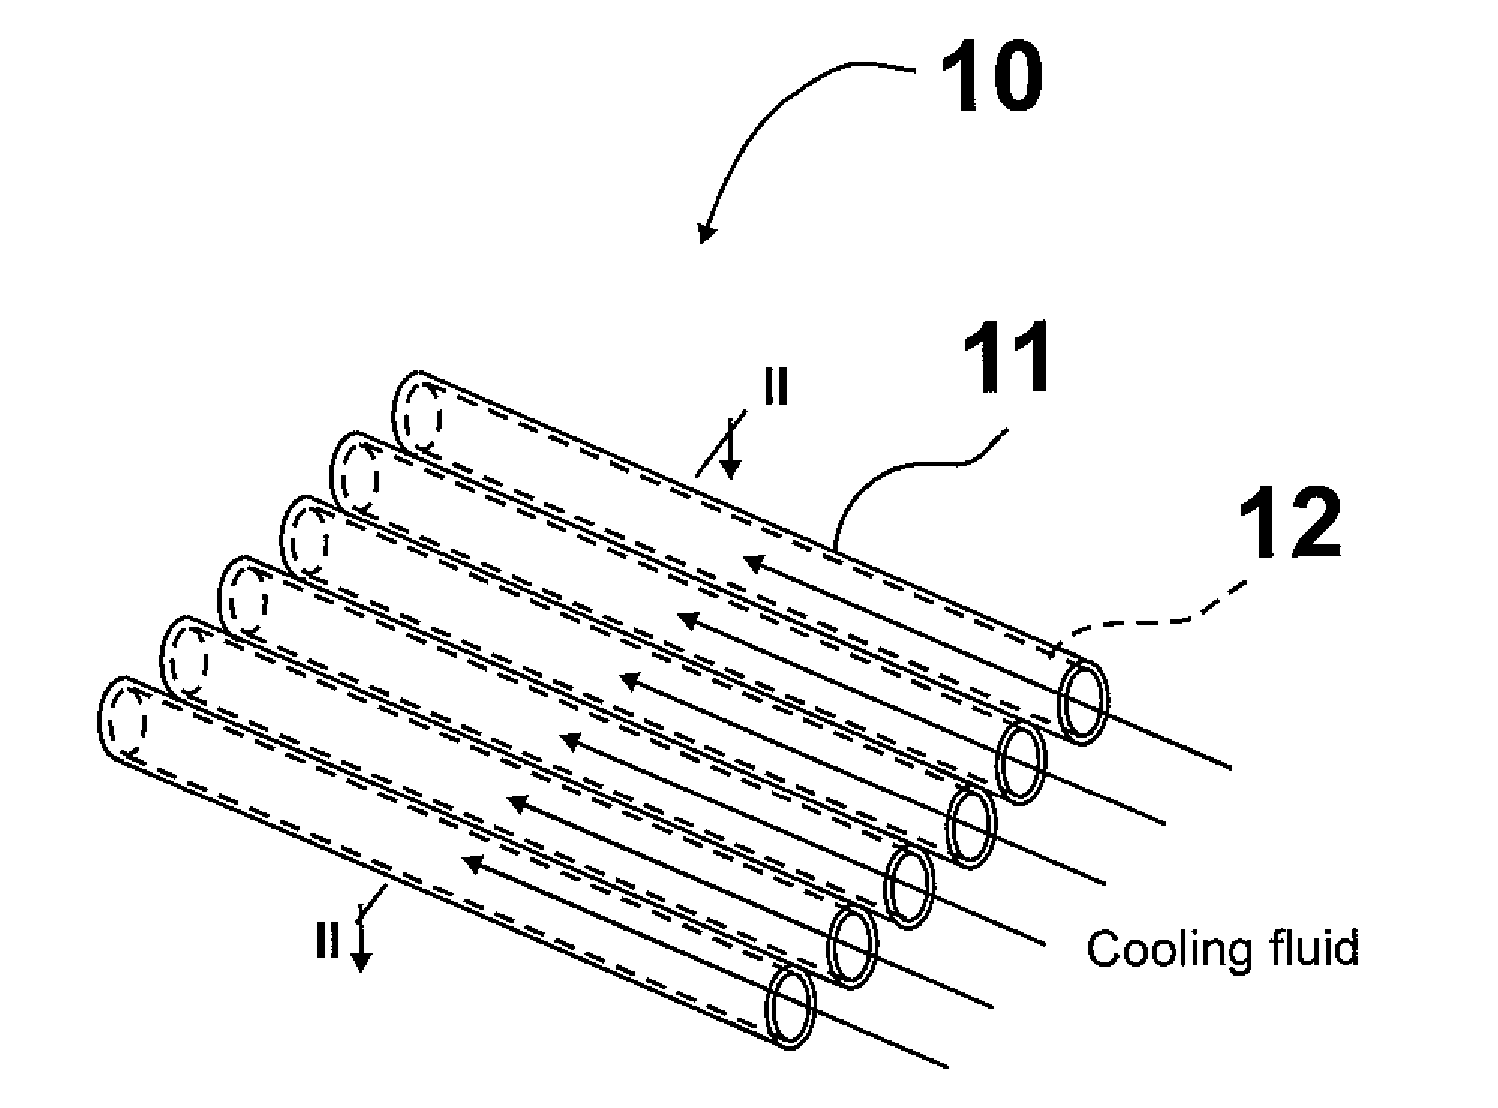 Supported metal membrane with internal cooling for h2 separation